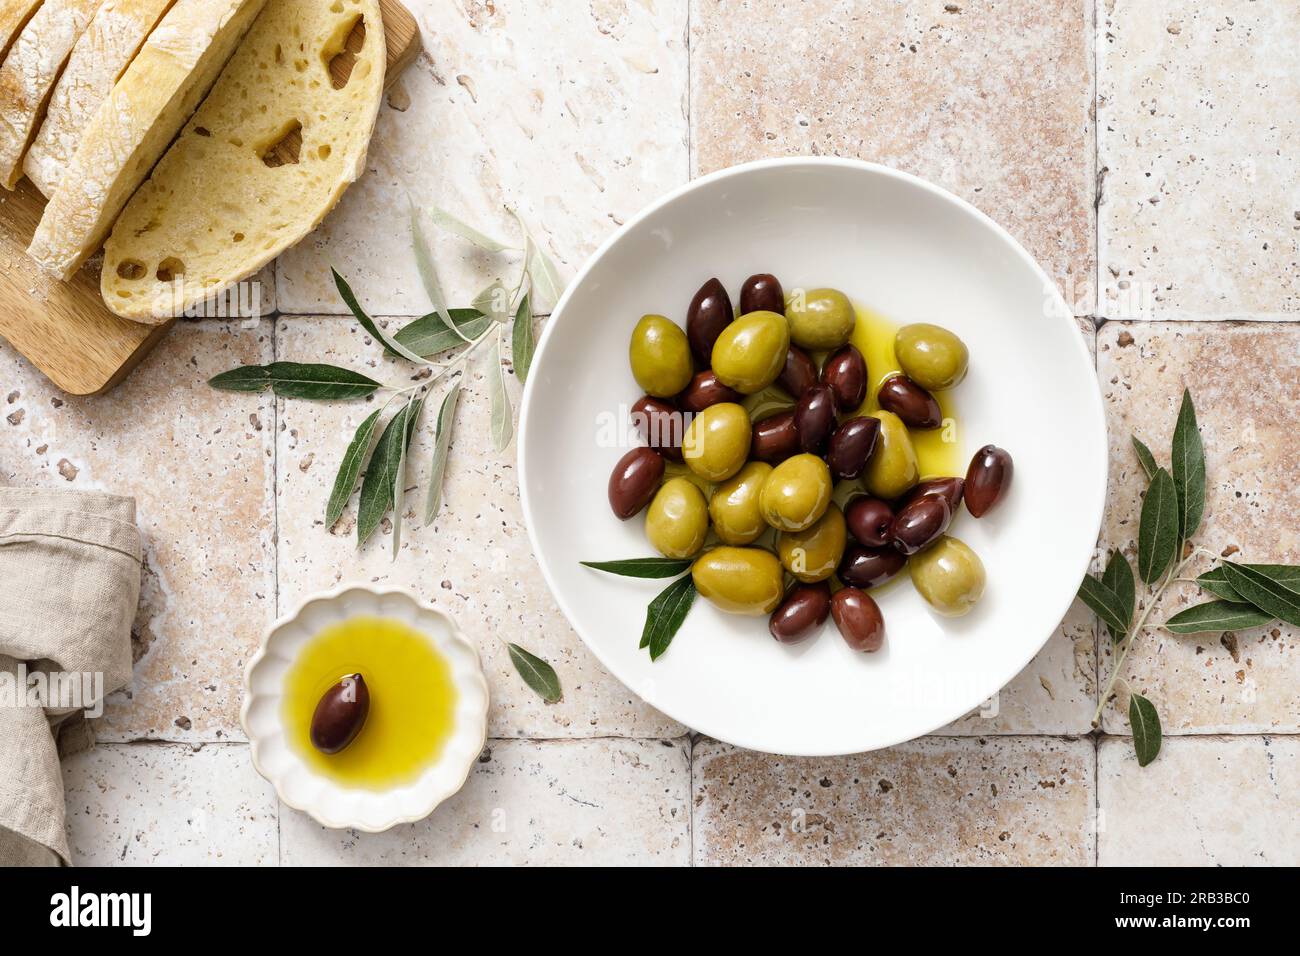 Olives, olive oil and ciabatta, top view Stock Photo